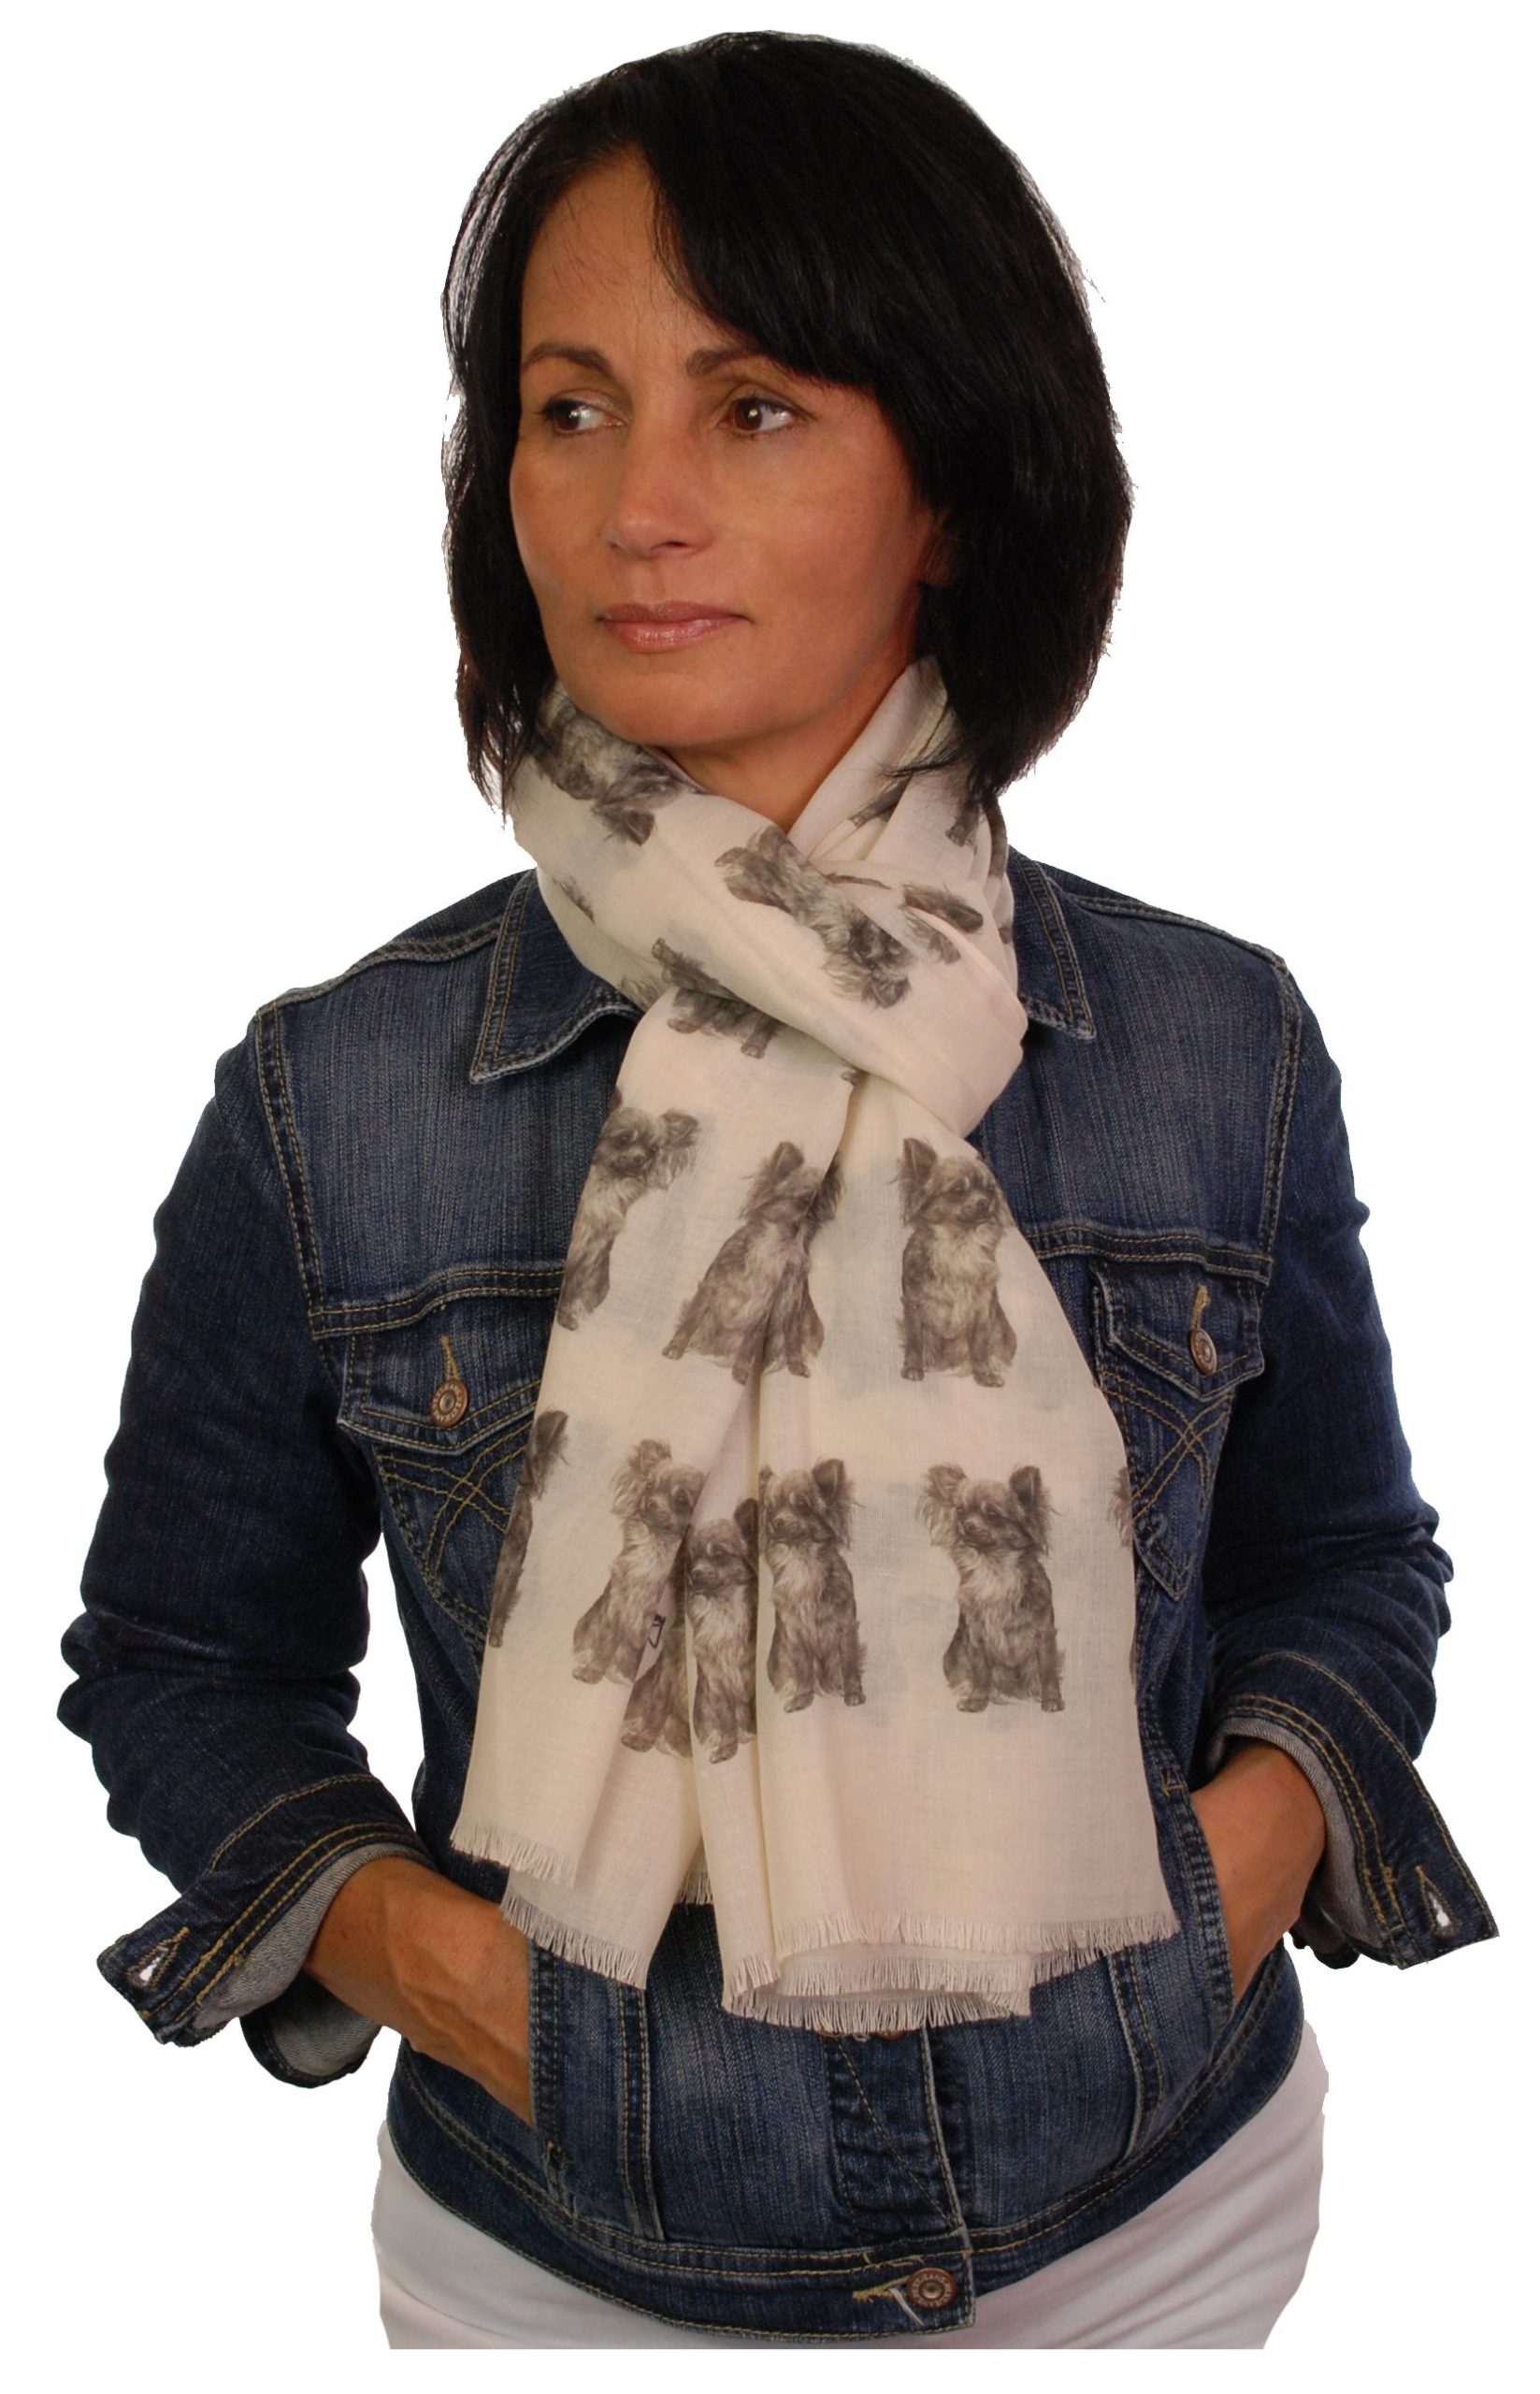 Mike Sibley Chihuahua licensed design ladies fashion scarf